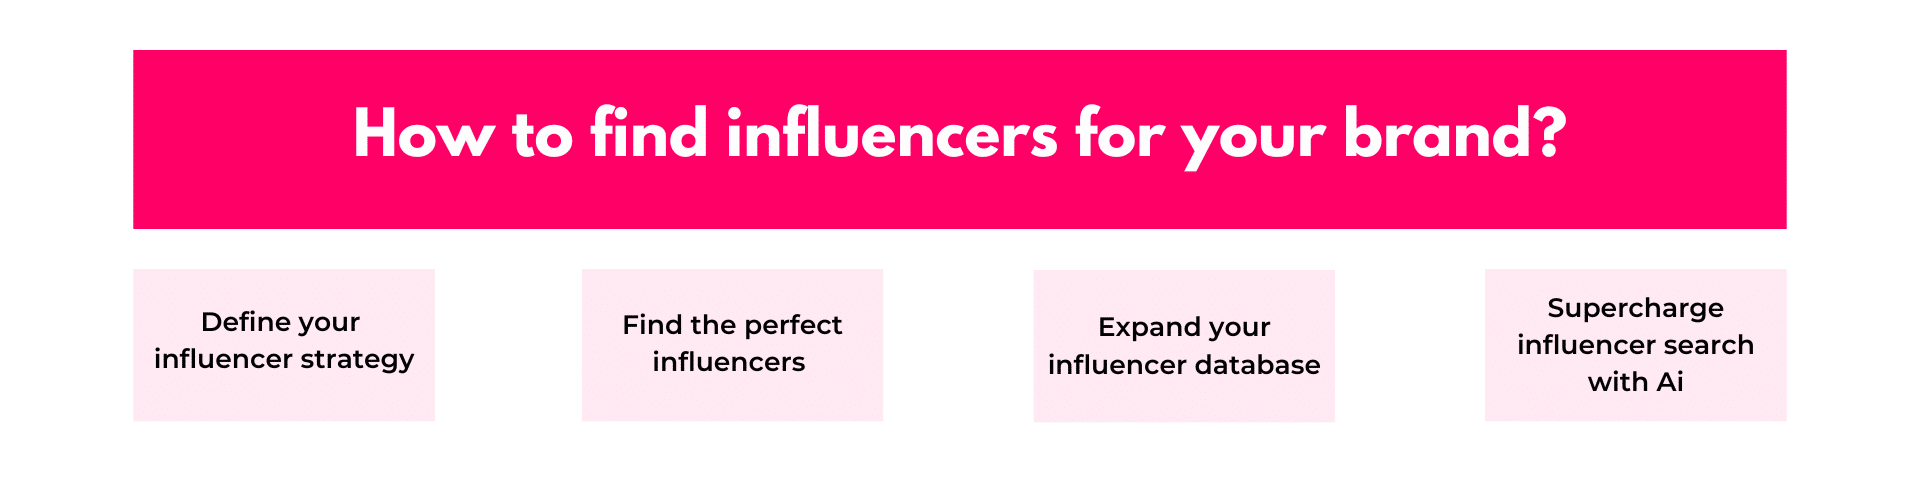 How to find influencers for your brand.